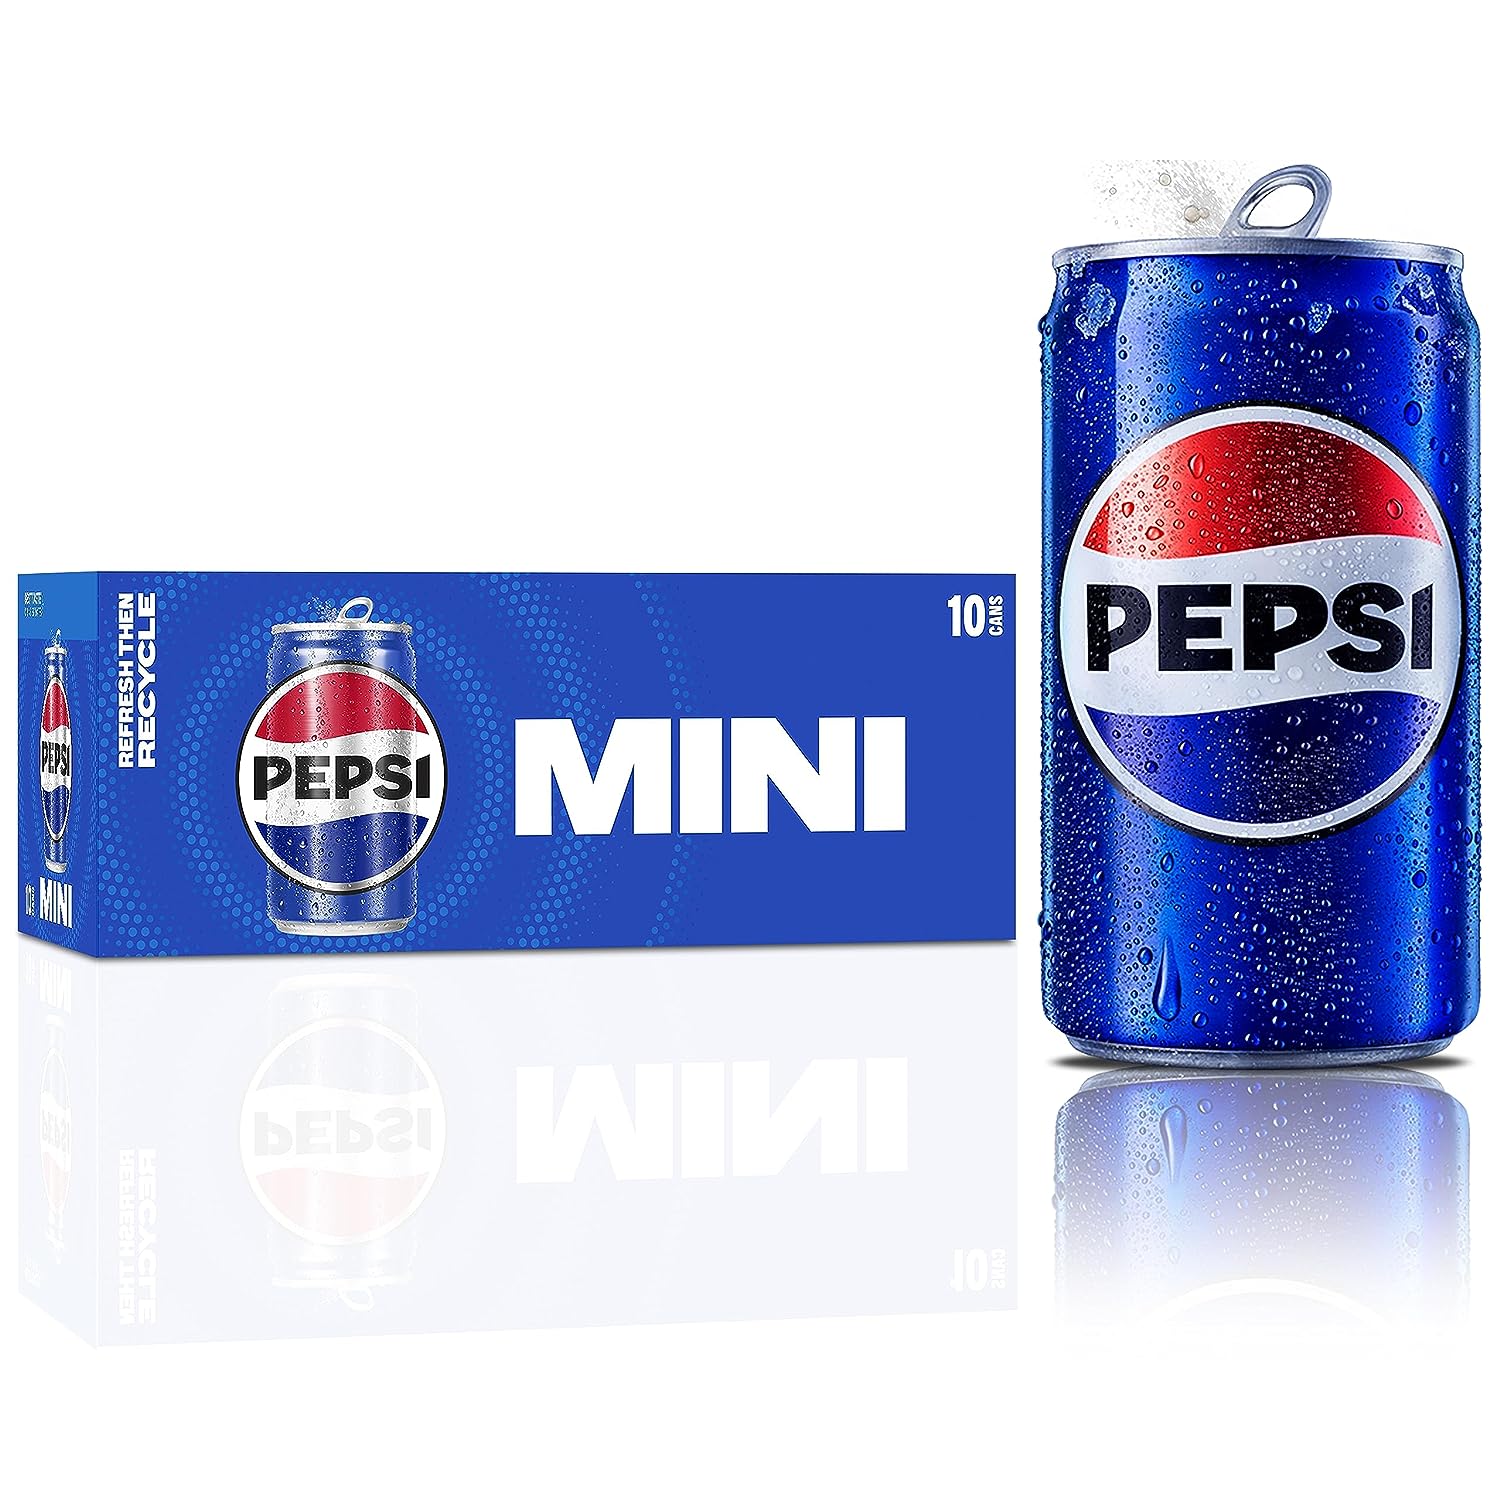 Pepsi Soda, Mini Cans, 7.5 Ounce (Pack of 10)